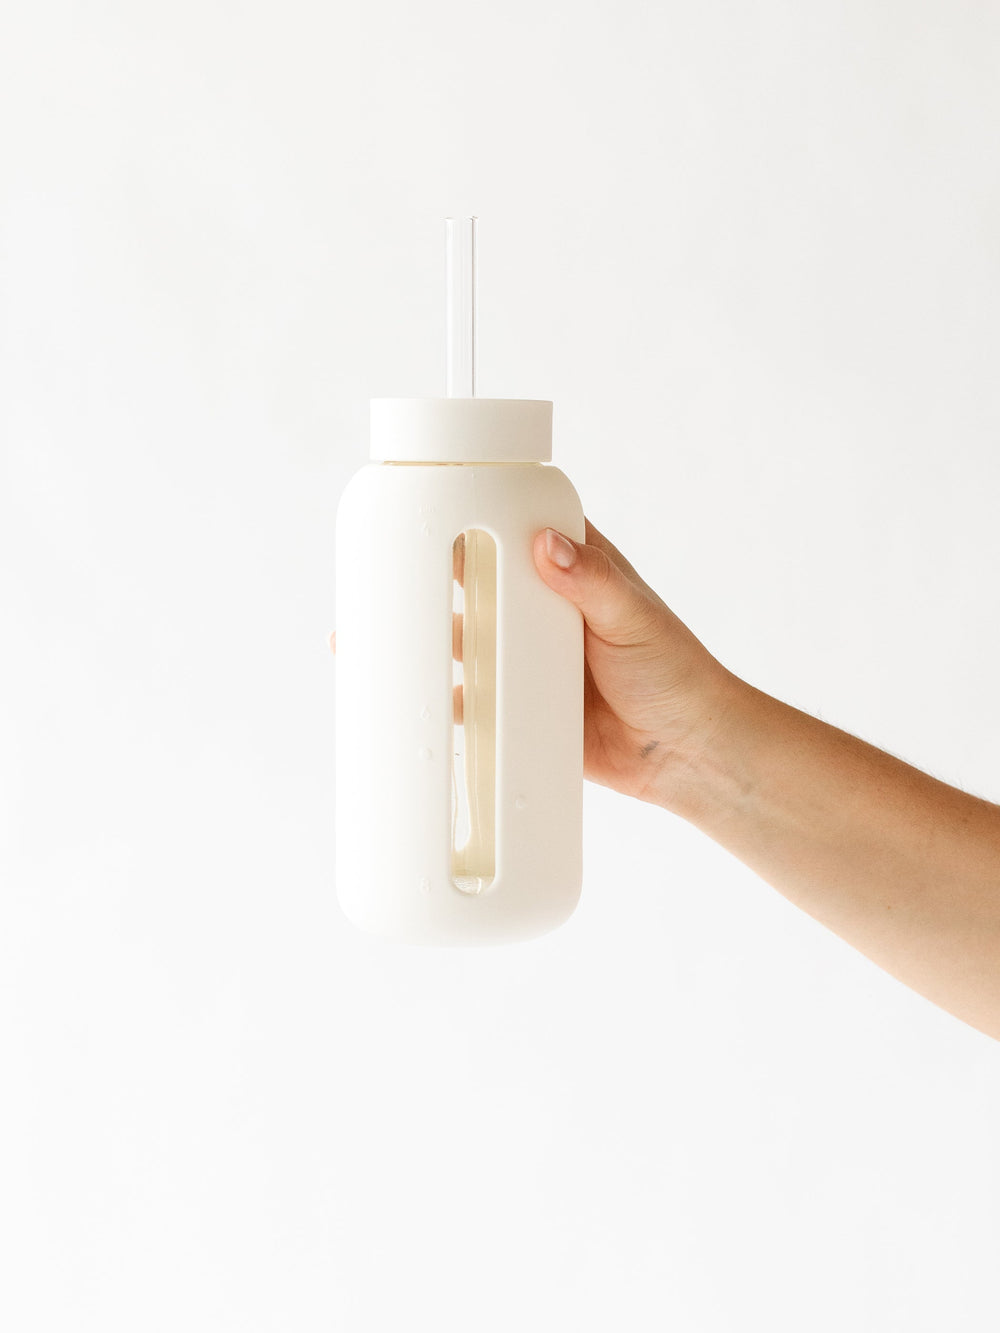 https://cdn.shopify.com/s/files/1/0552/3117/products/day-bottle-the-hydration-tracking-water-bottle-27oz-white-bink-water-bottles-lil-tulips-30509991329910.jpg?v=1680110773&width=1000